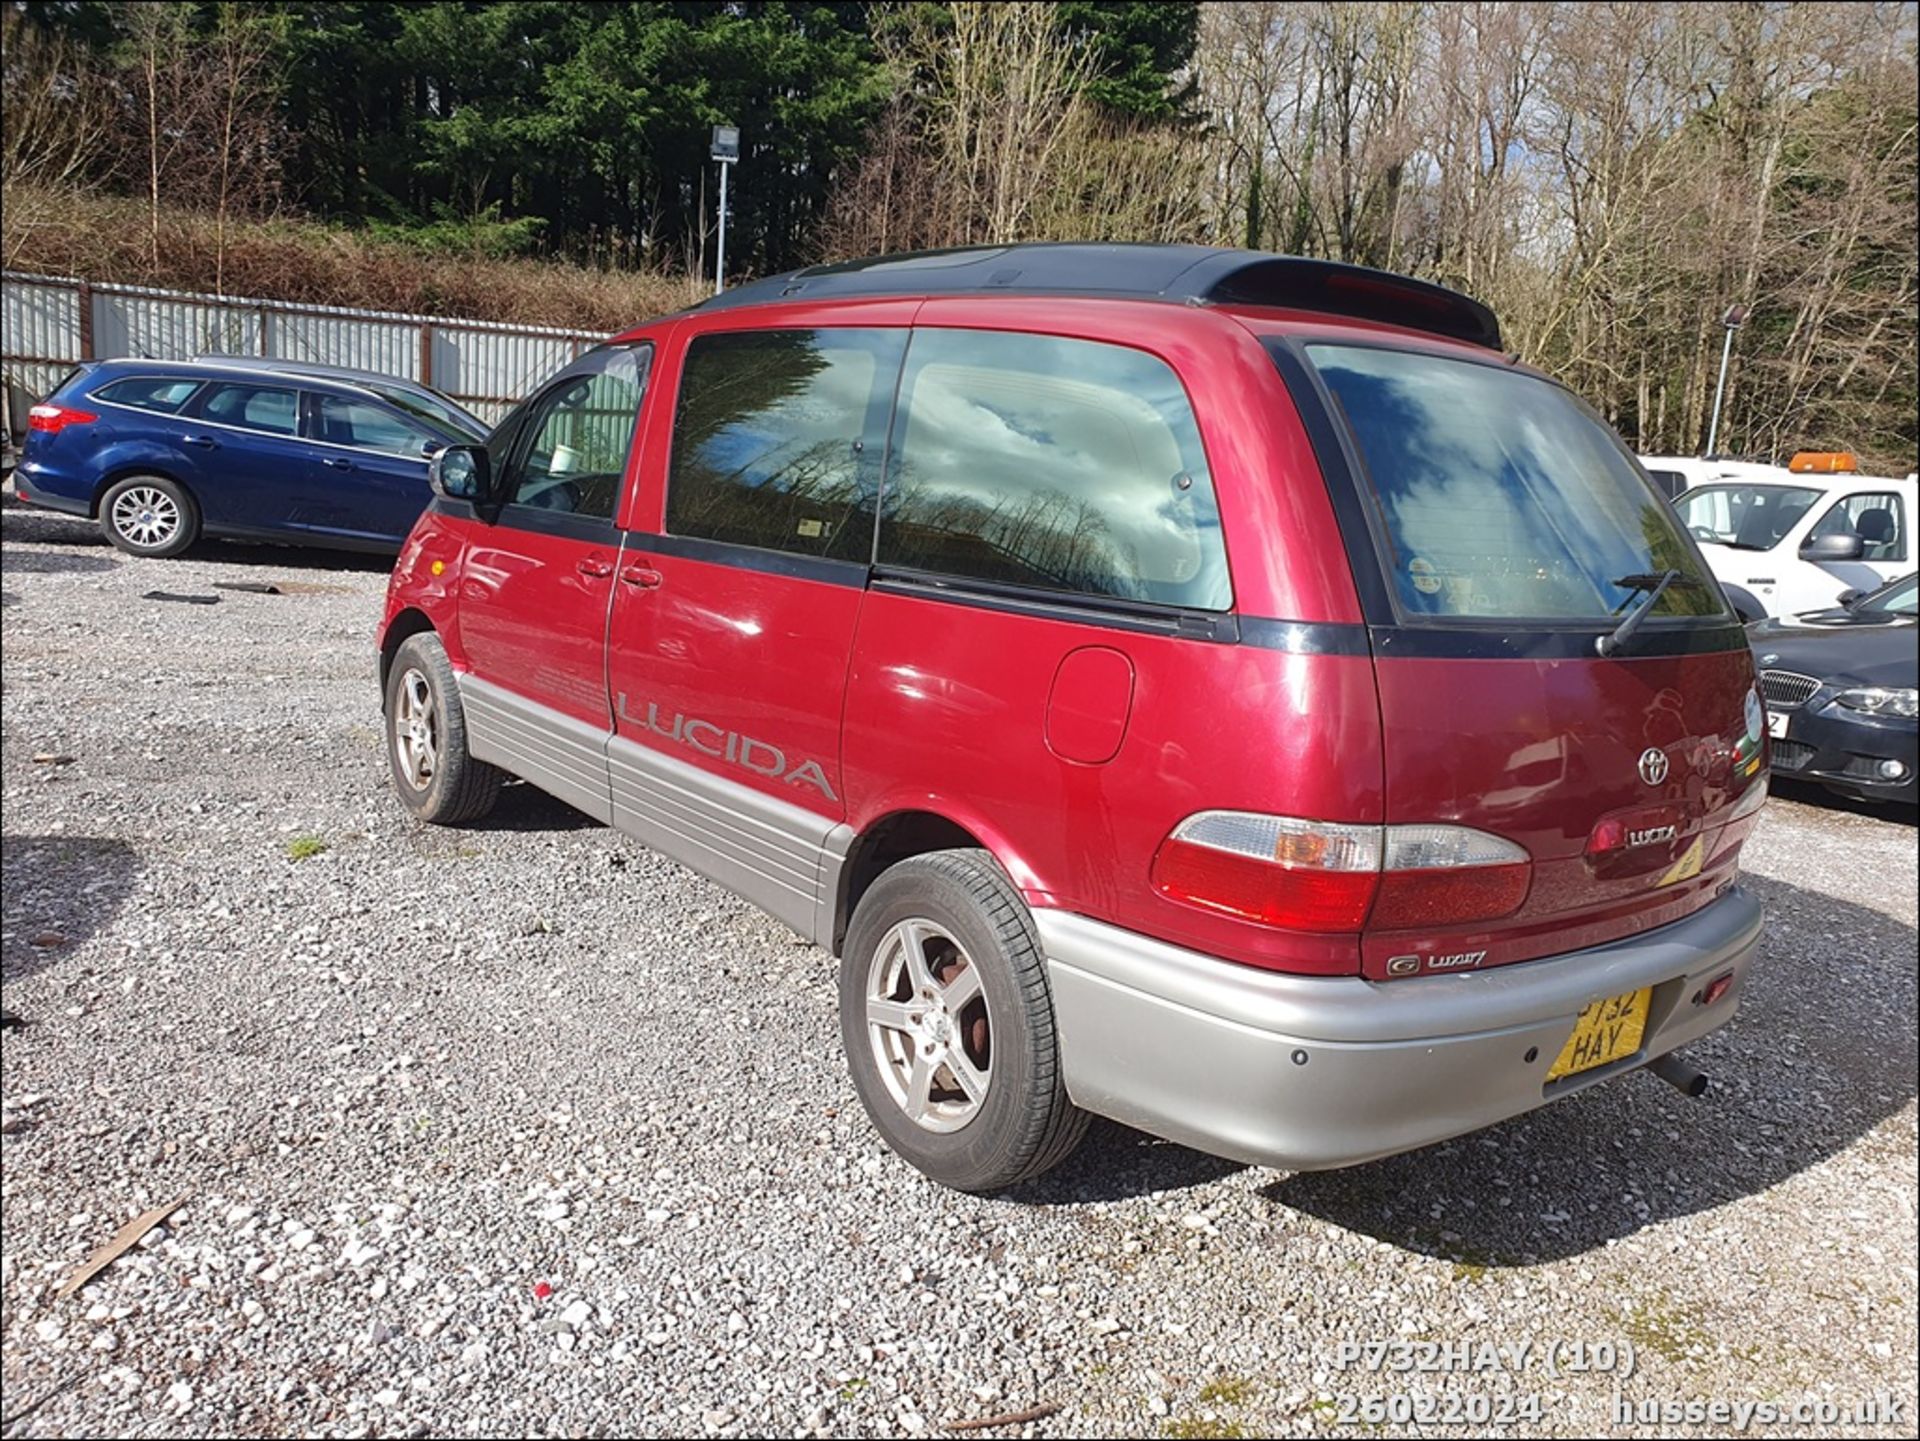 1997 TOYOTA LUCIDA - 2184cc 4dr Van (Red) - Image 11 of 22